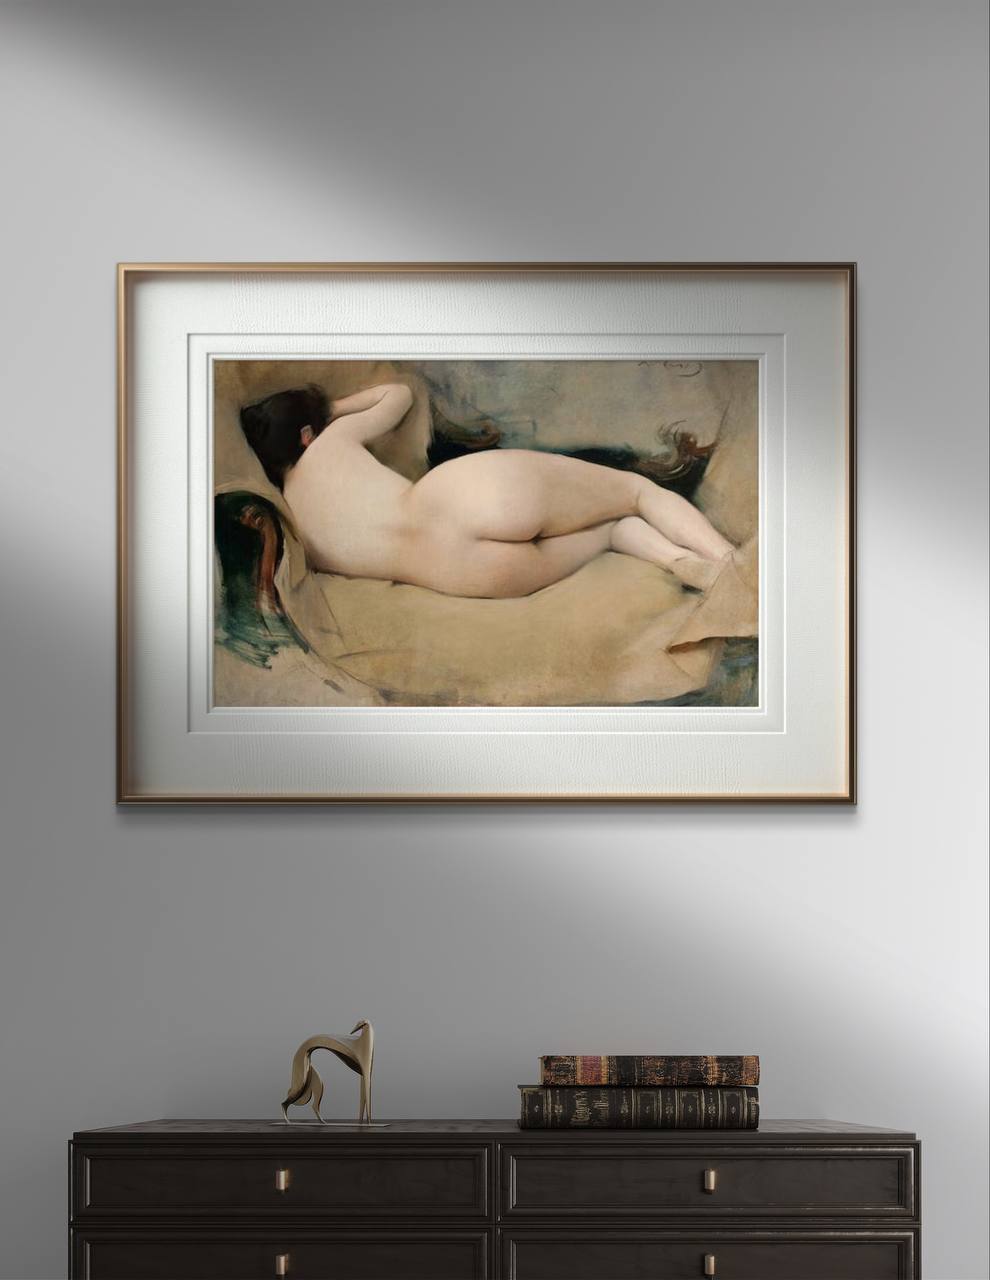 A framed poster print of "Nude Figure Study" by Ramon Casas, elegantly displayed in a modern living area. The artwork features a reclining nude figure with delicate, natural tones and a soft, serene atmosphere. This art reproduction brings a timeless and sophisticated touch to your home decor, making it an excellent choice for art lovers. Keywords: Wall Art, home decor, painting, art reproduction, famous artist, Poster, print, Ramon Casas, Nude Figure Study